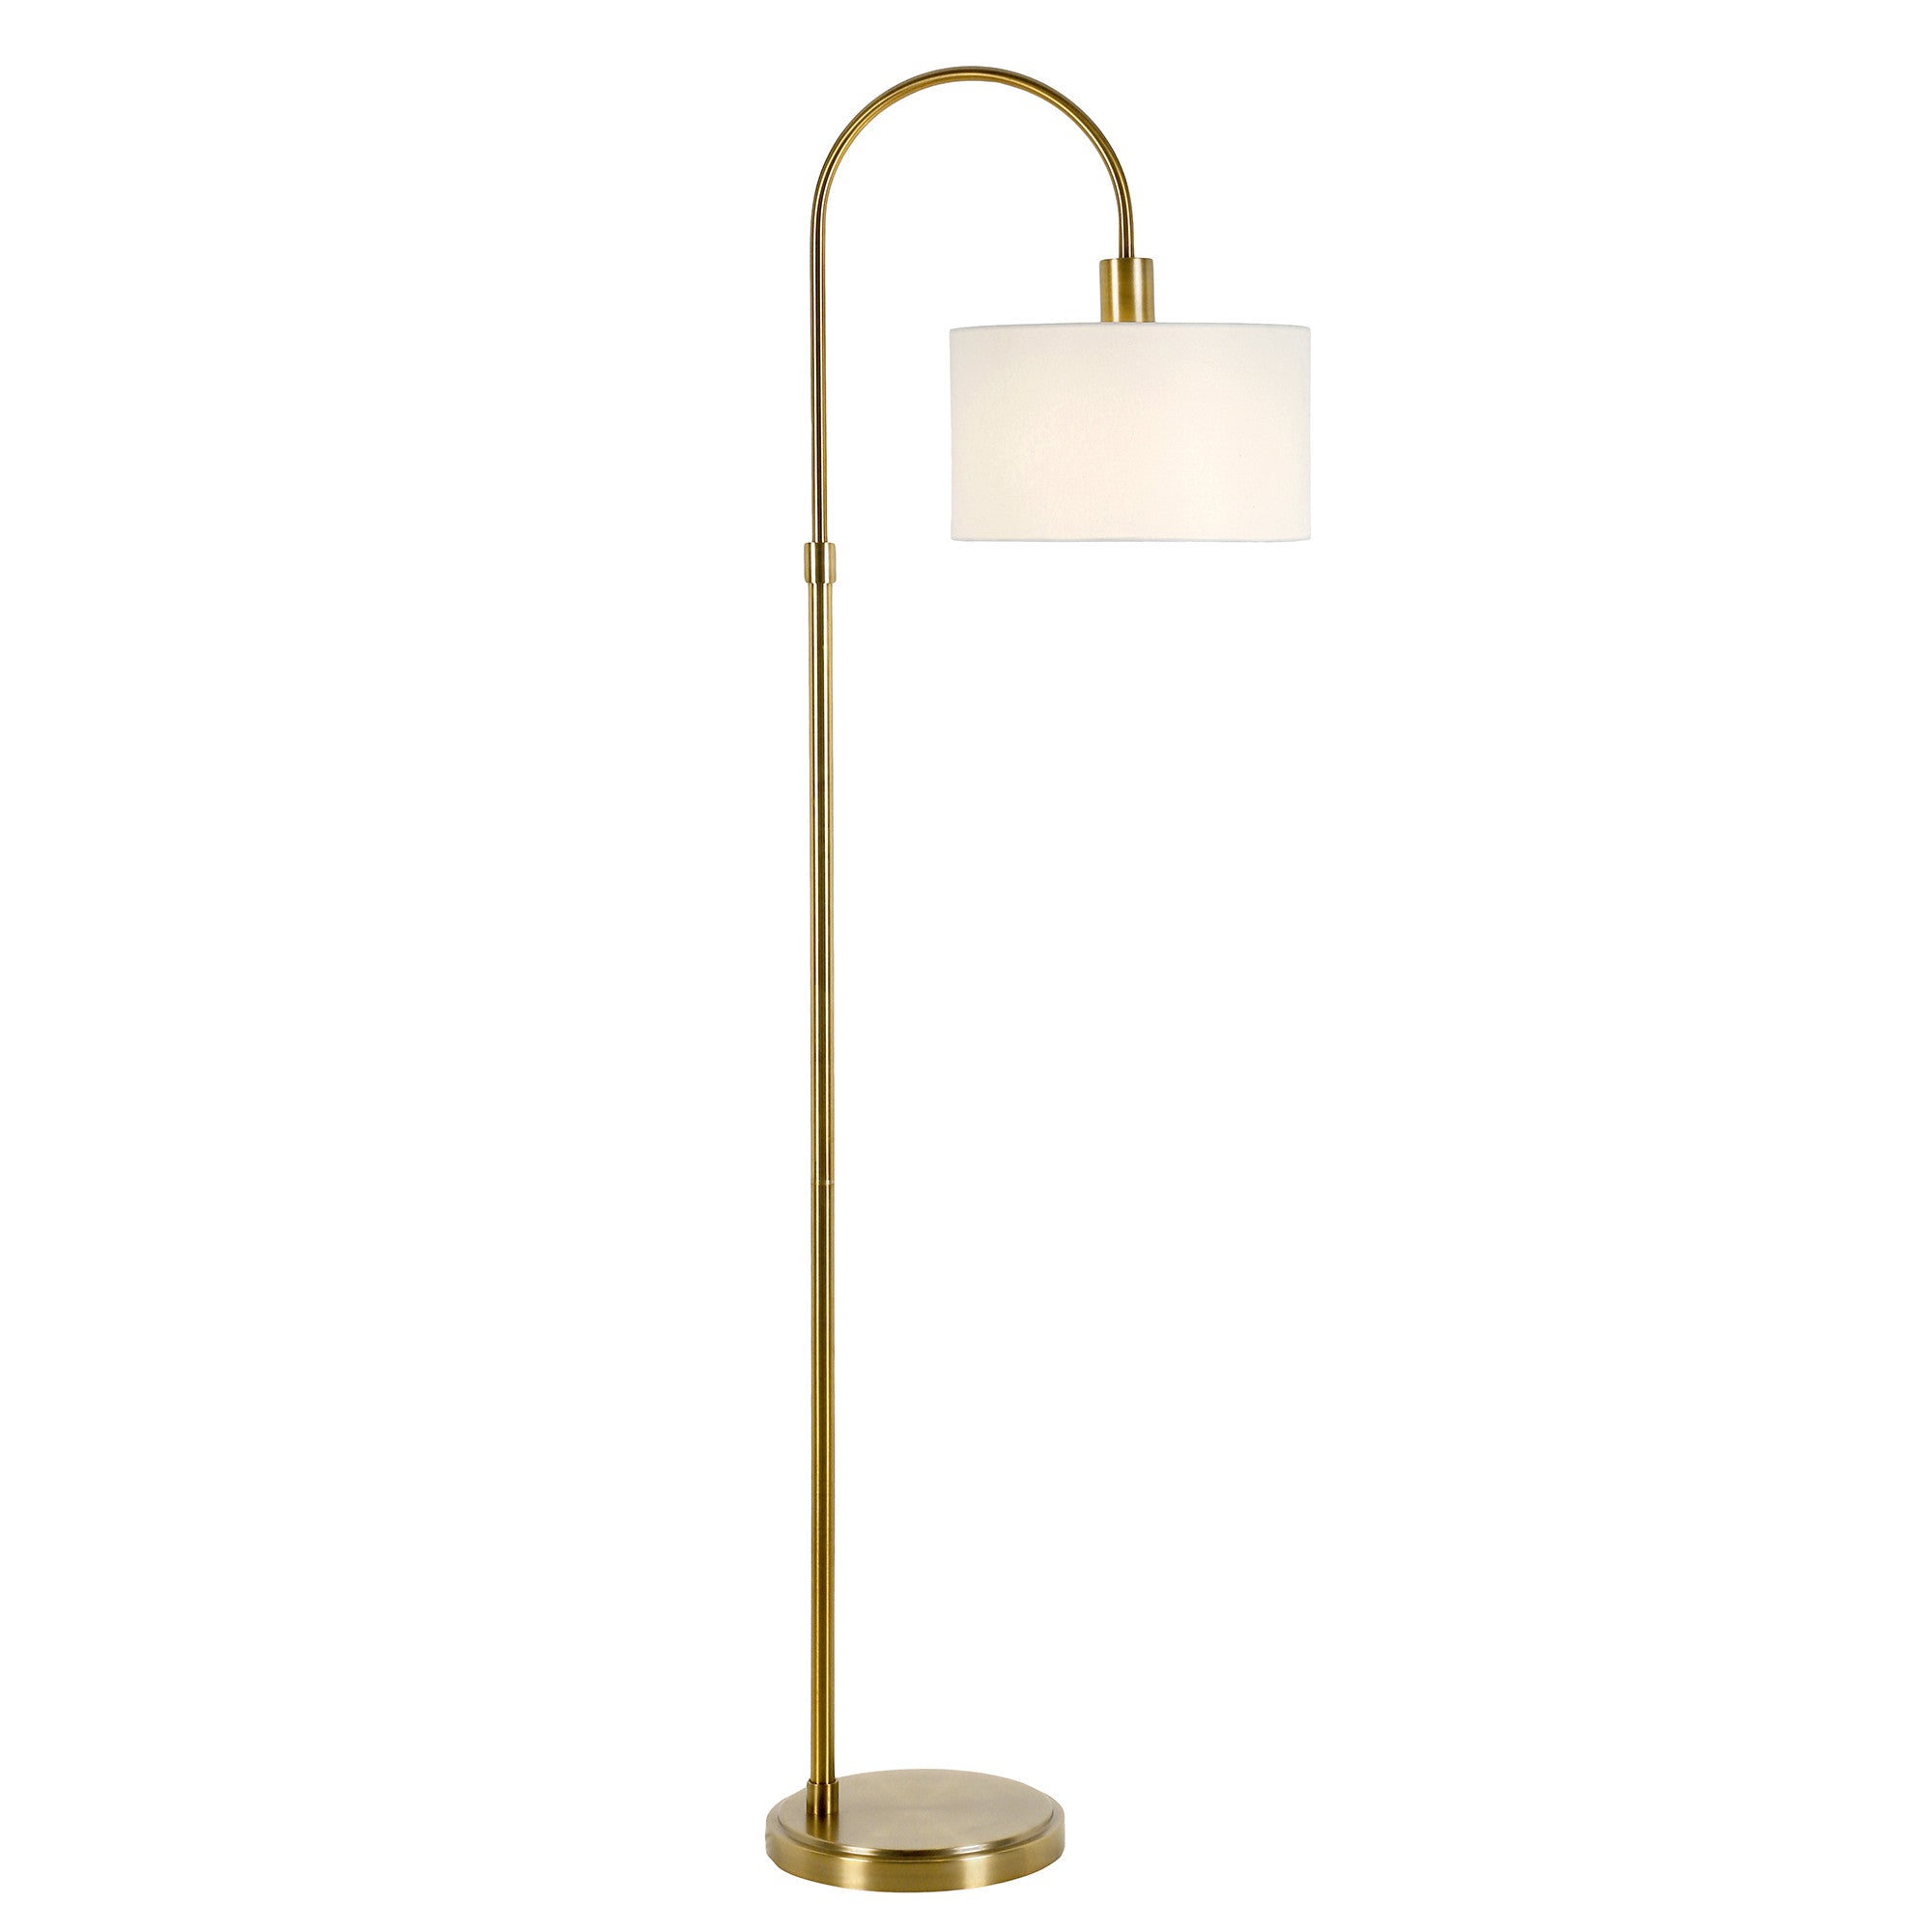 70" Brass Arched Floor Lamp With White Frosted Glass Drum Shade